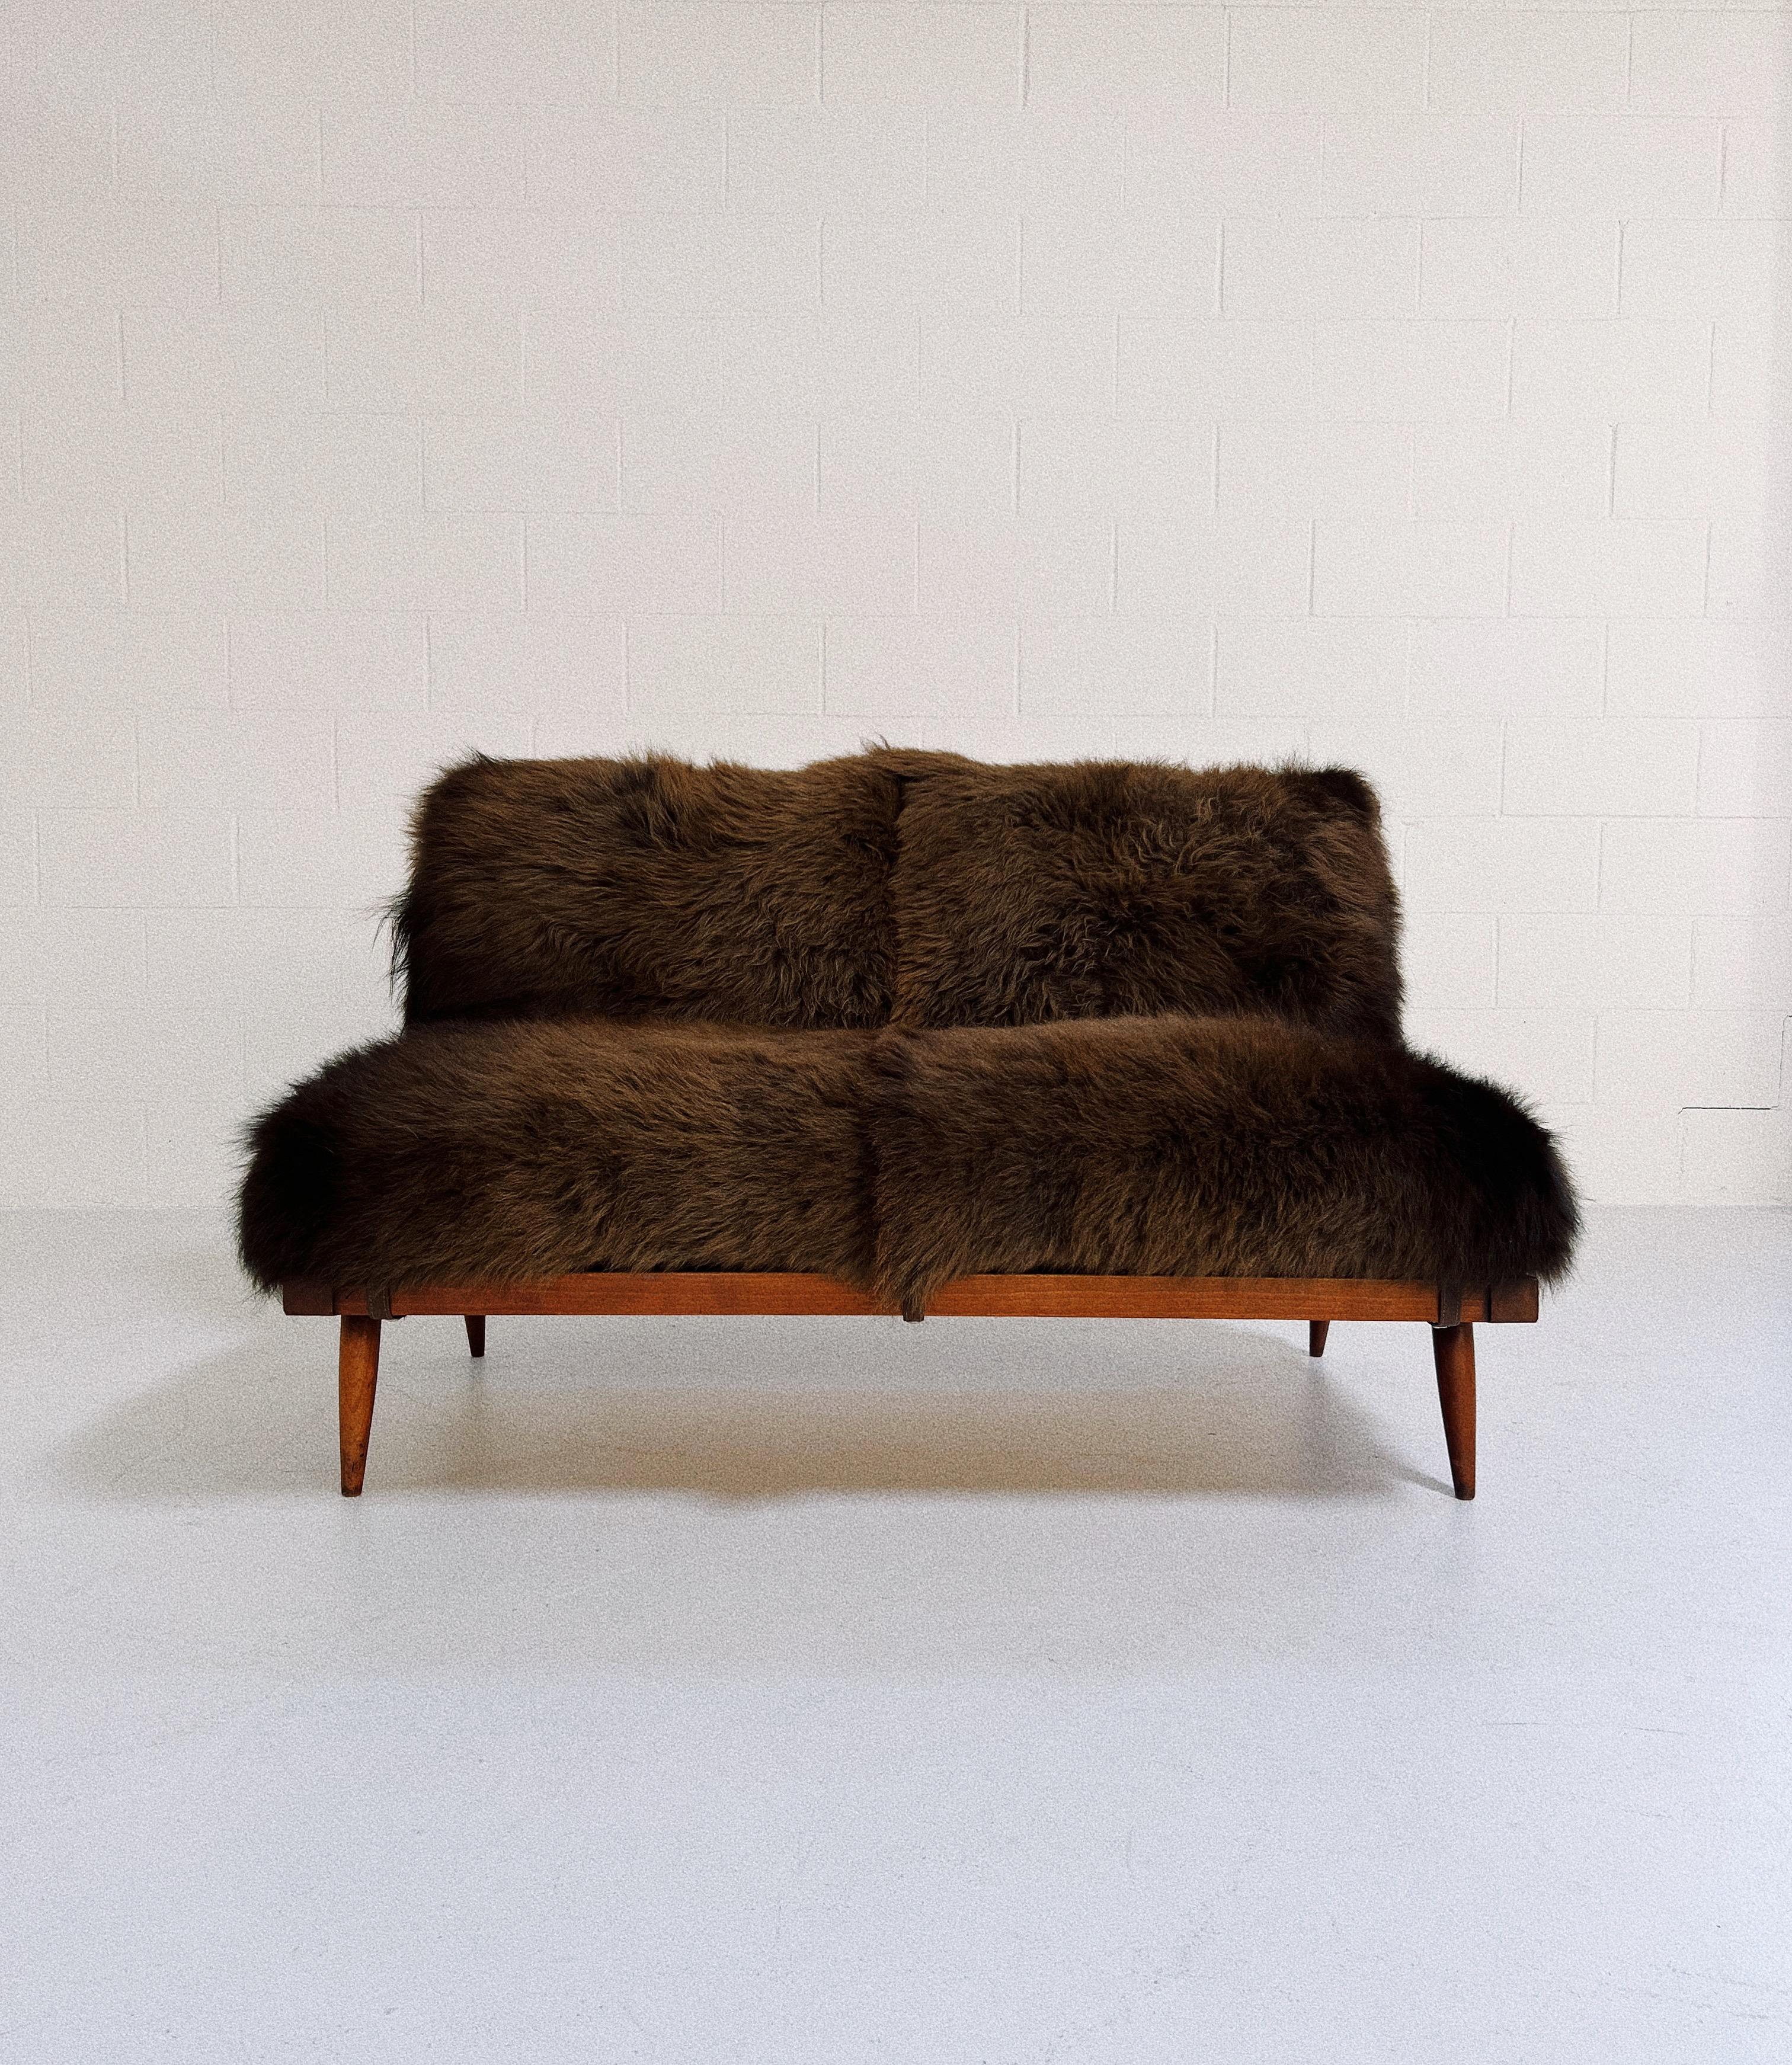 American Craftsman George Nakashima Settee with American Bison Hide Cushions For Sale